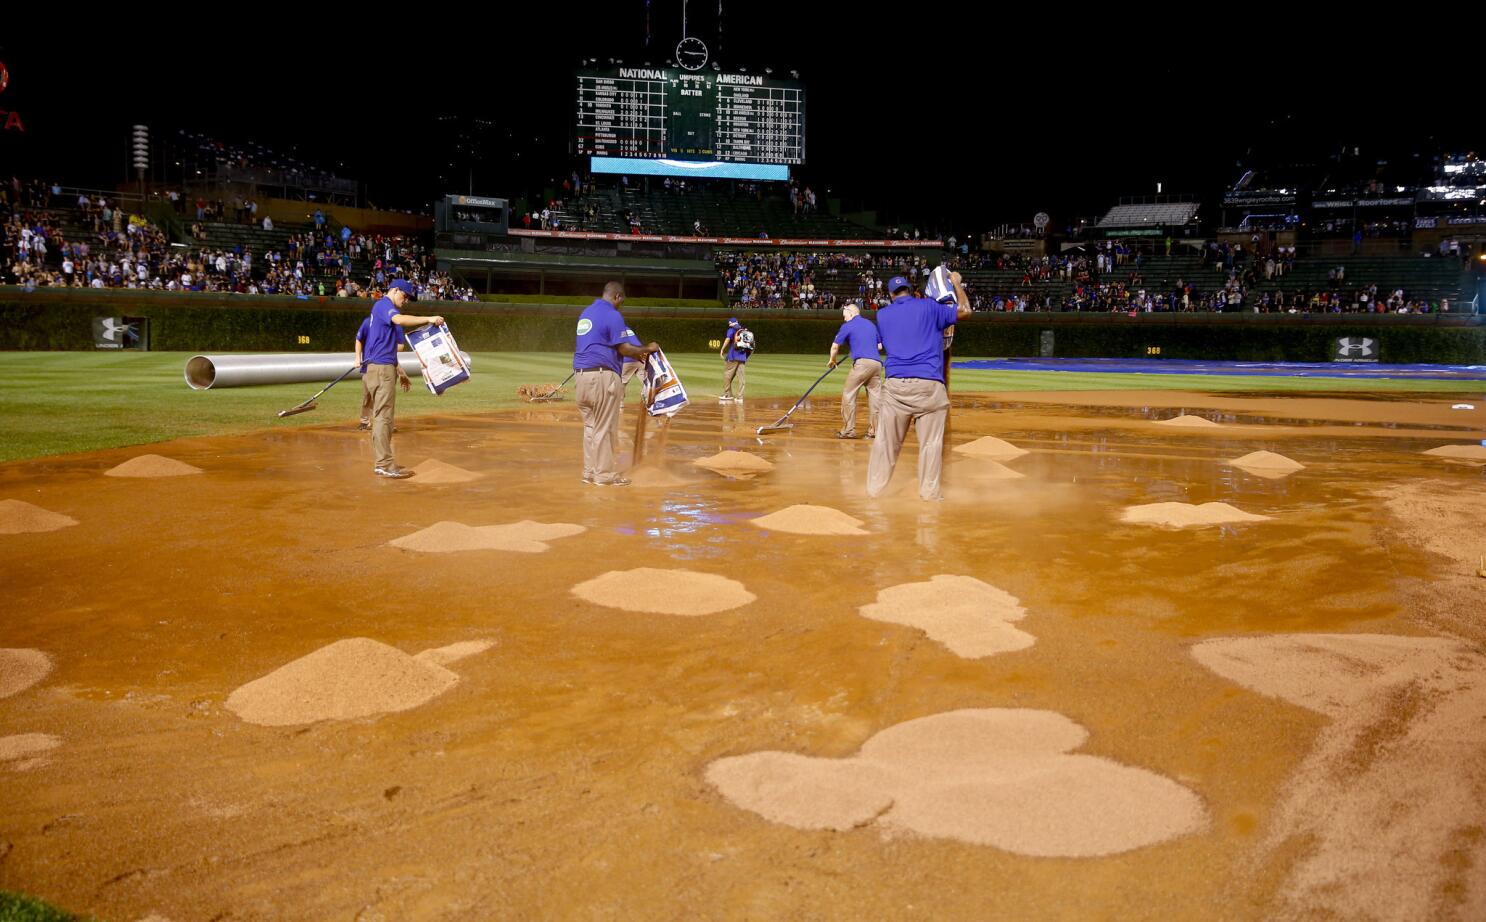 Lights at Wrigley Field: From protests to the first night game